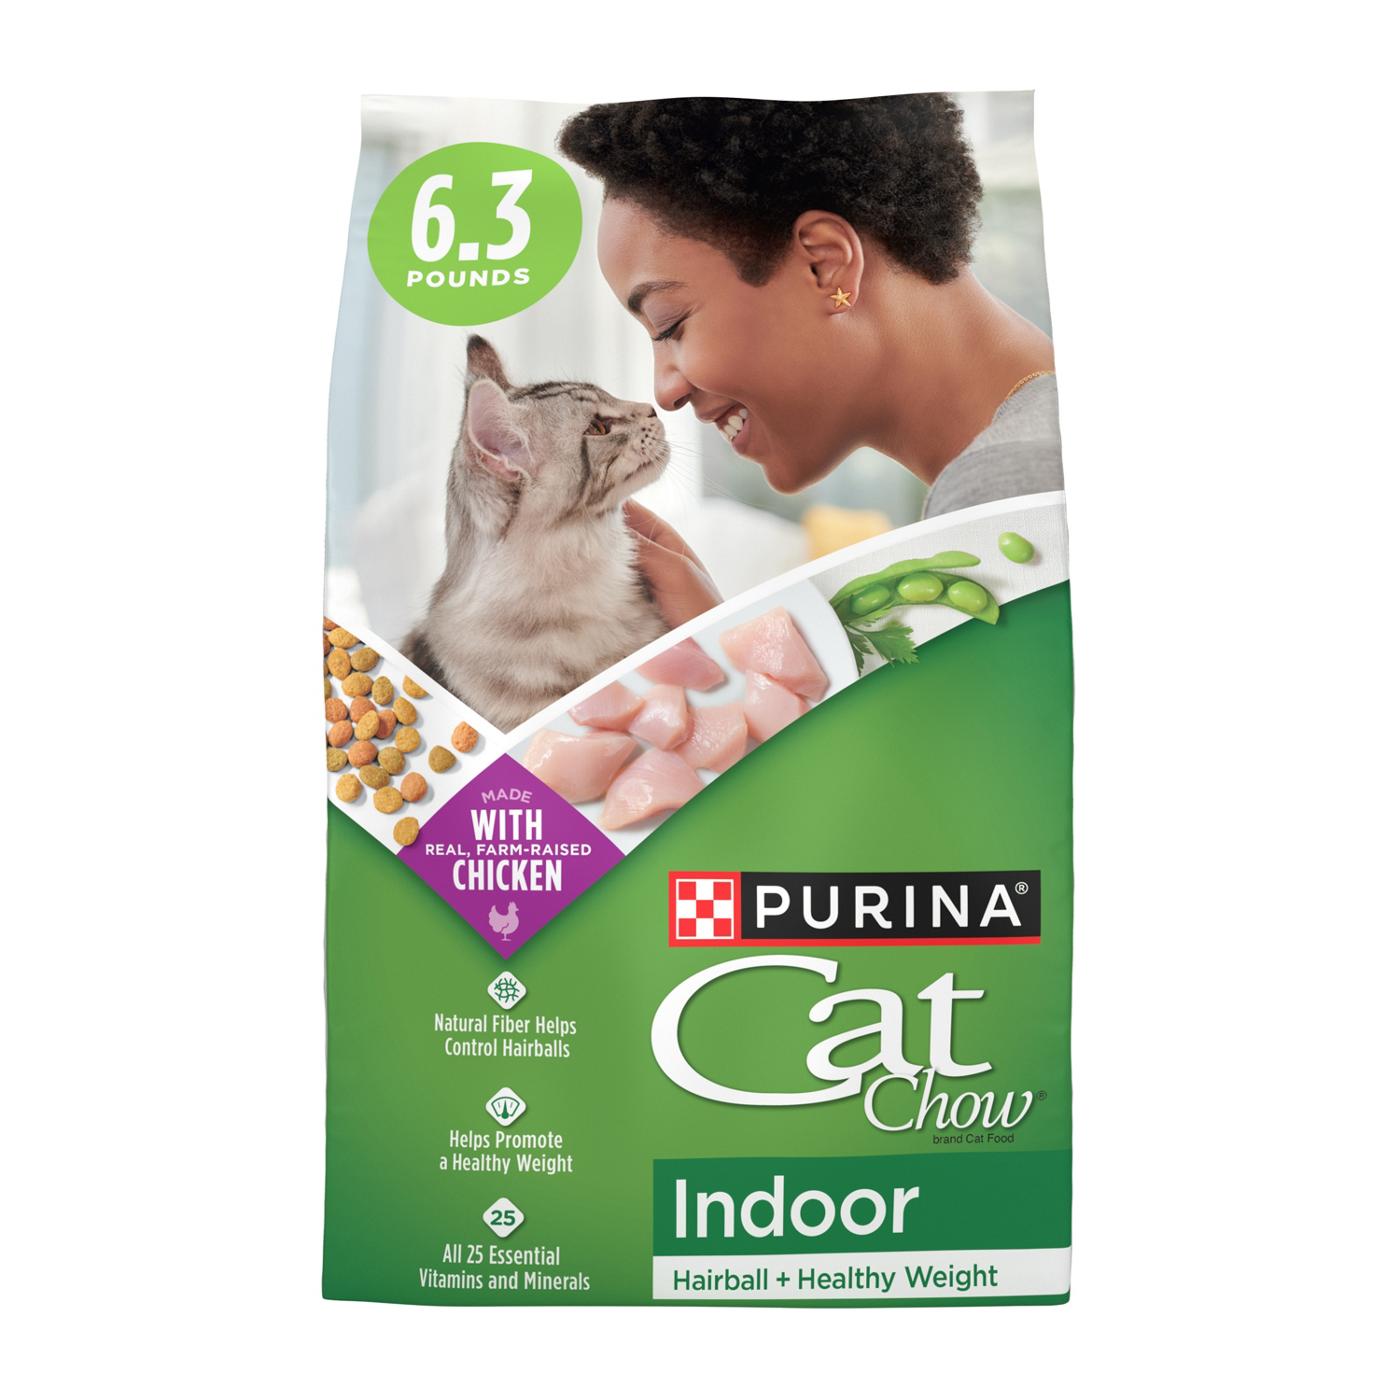 Cat Chow Purina Cat Chow Indoor Dry Cat Food, Hairball + Healthy Weight; image 1 of 6